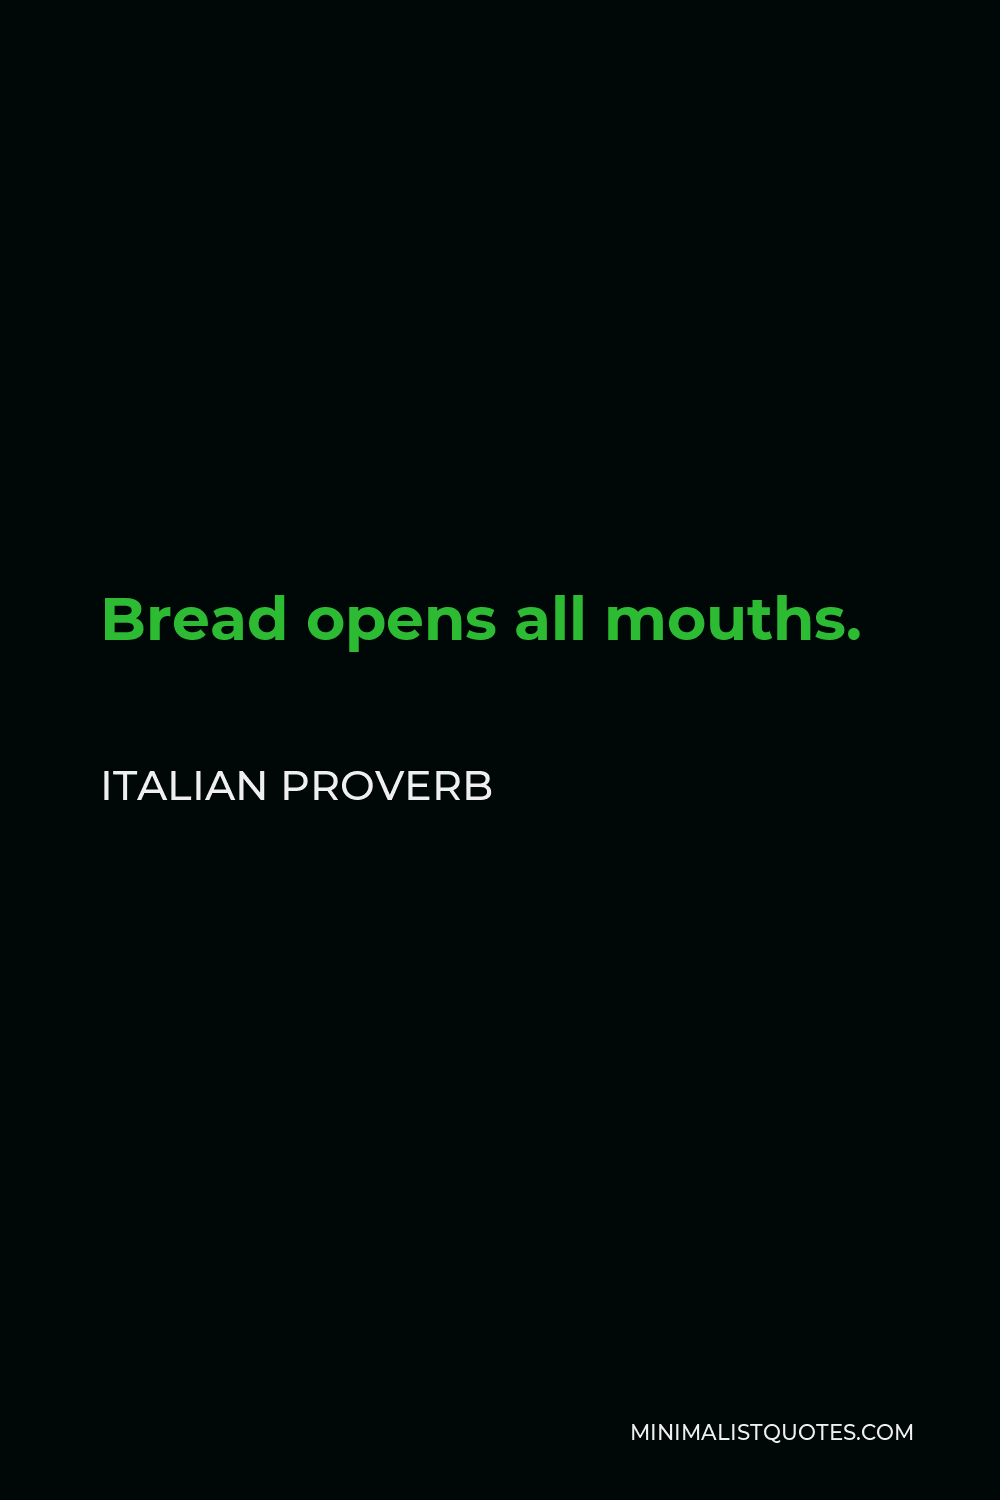 Italian Proverb Quote - Bread opens all mouths.